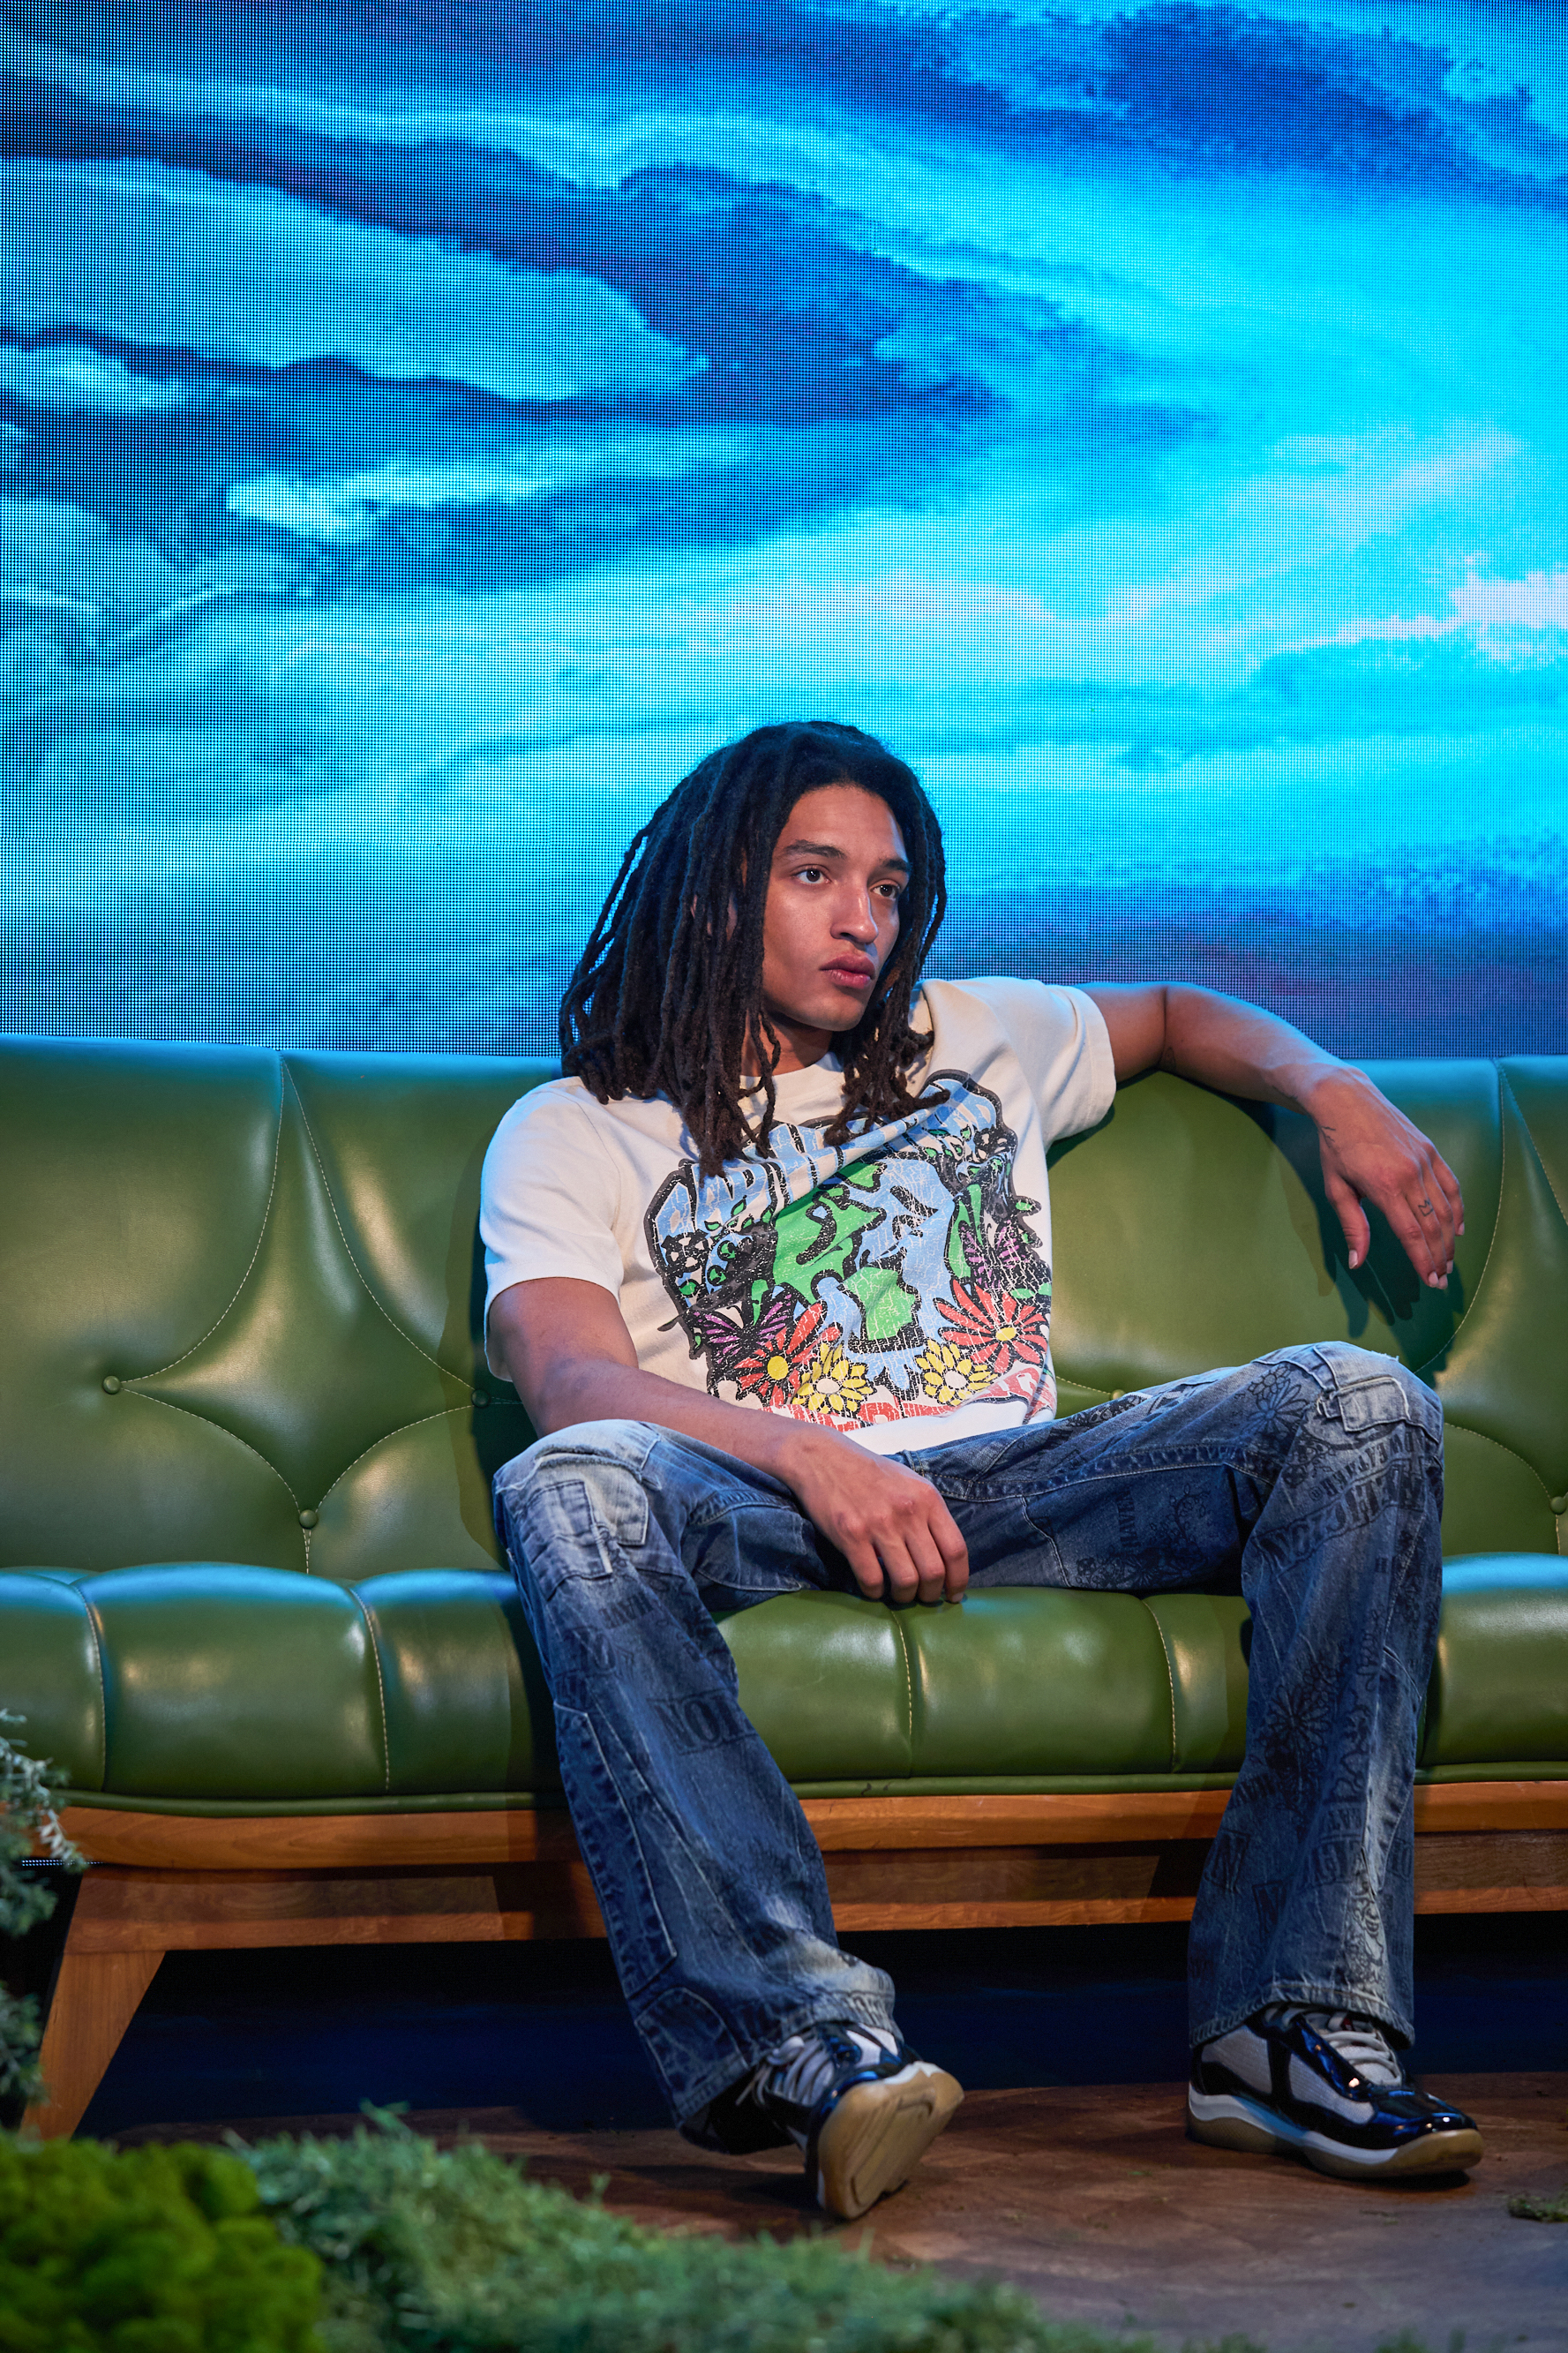 Person sits on green couch, wearing jeans and a graphic t-shirt with a nature design, with a blue scenic background